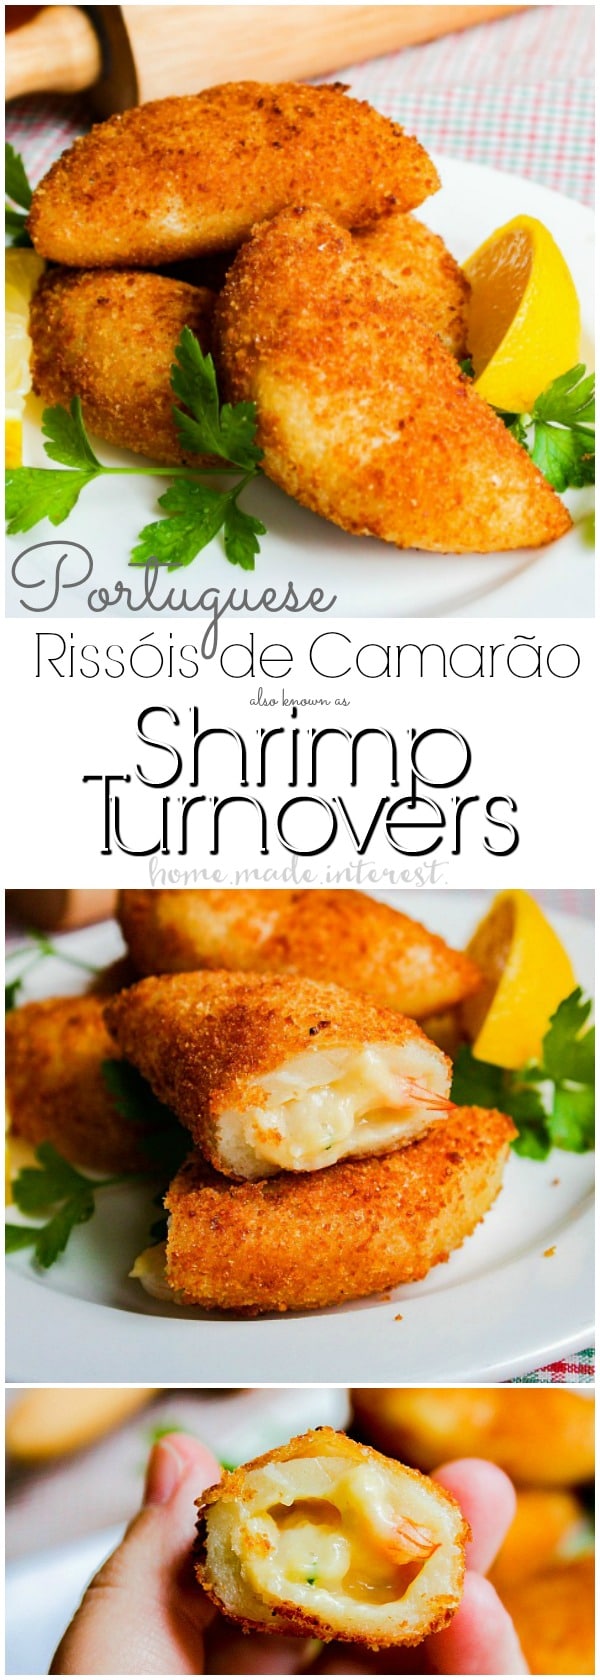 Portuguese Shrimp Turnovers | My favorite appetizer for parties and celebrations are these Portuguese Shrimp Turnovers or Rissóis de Camarão. These shrimp dumplings are the ultimate Portuguese tradition and you’ll find them at every party and big event. This Shrimp turnover recipe is one of the best party appetizer recipes you will ever try. These shrimp dumplings are a make ahead appetizer recipe and they made a great seafood recipe for Lent! 